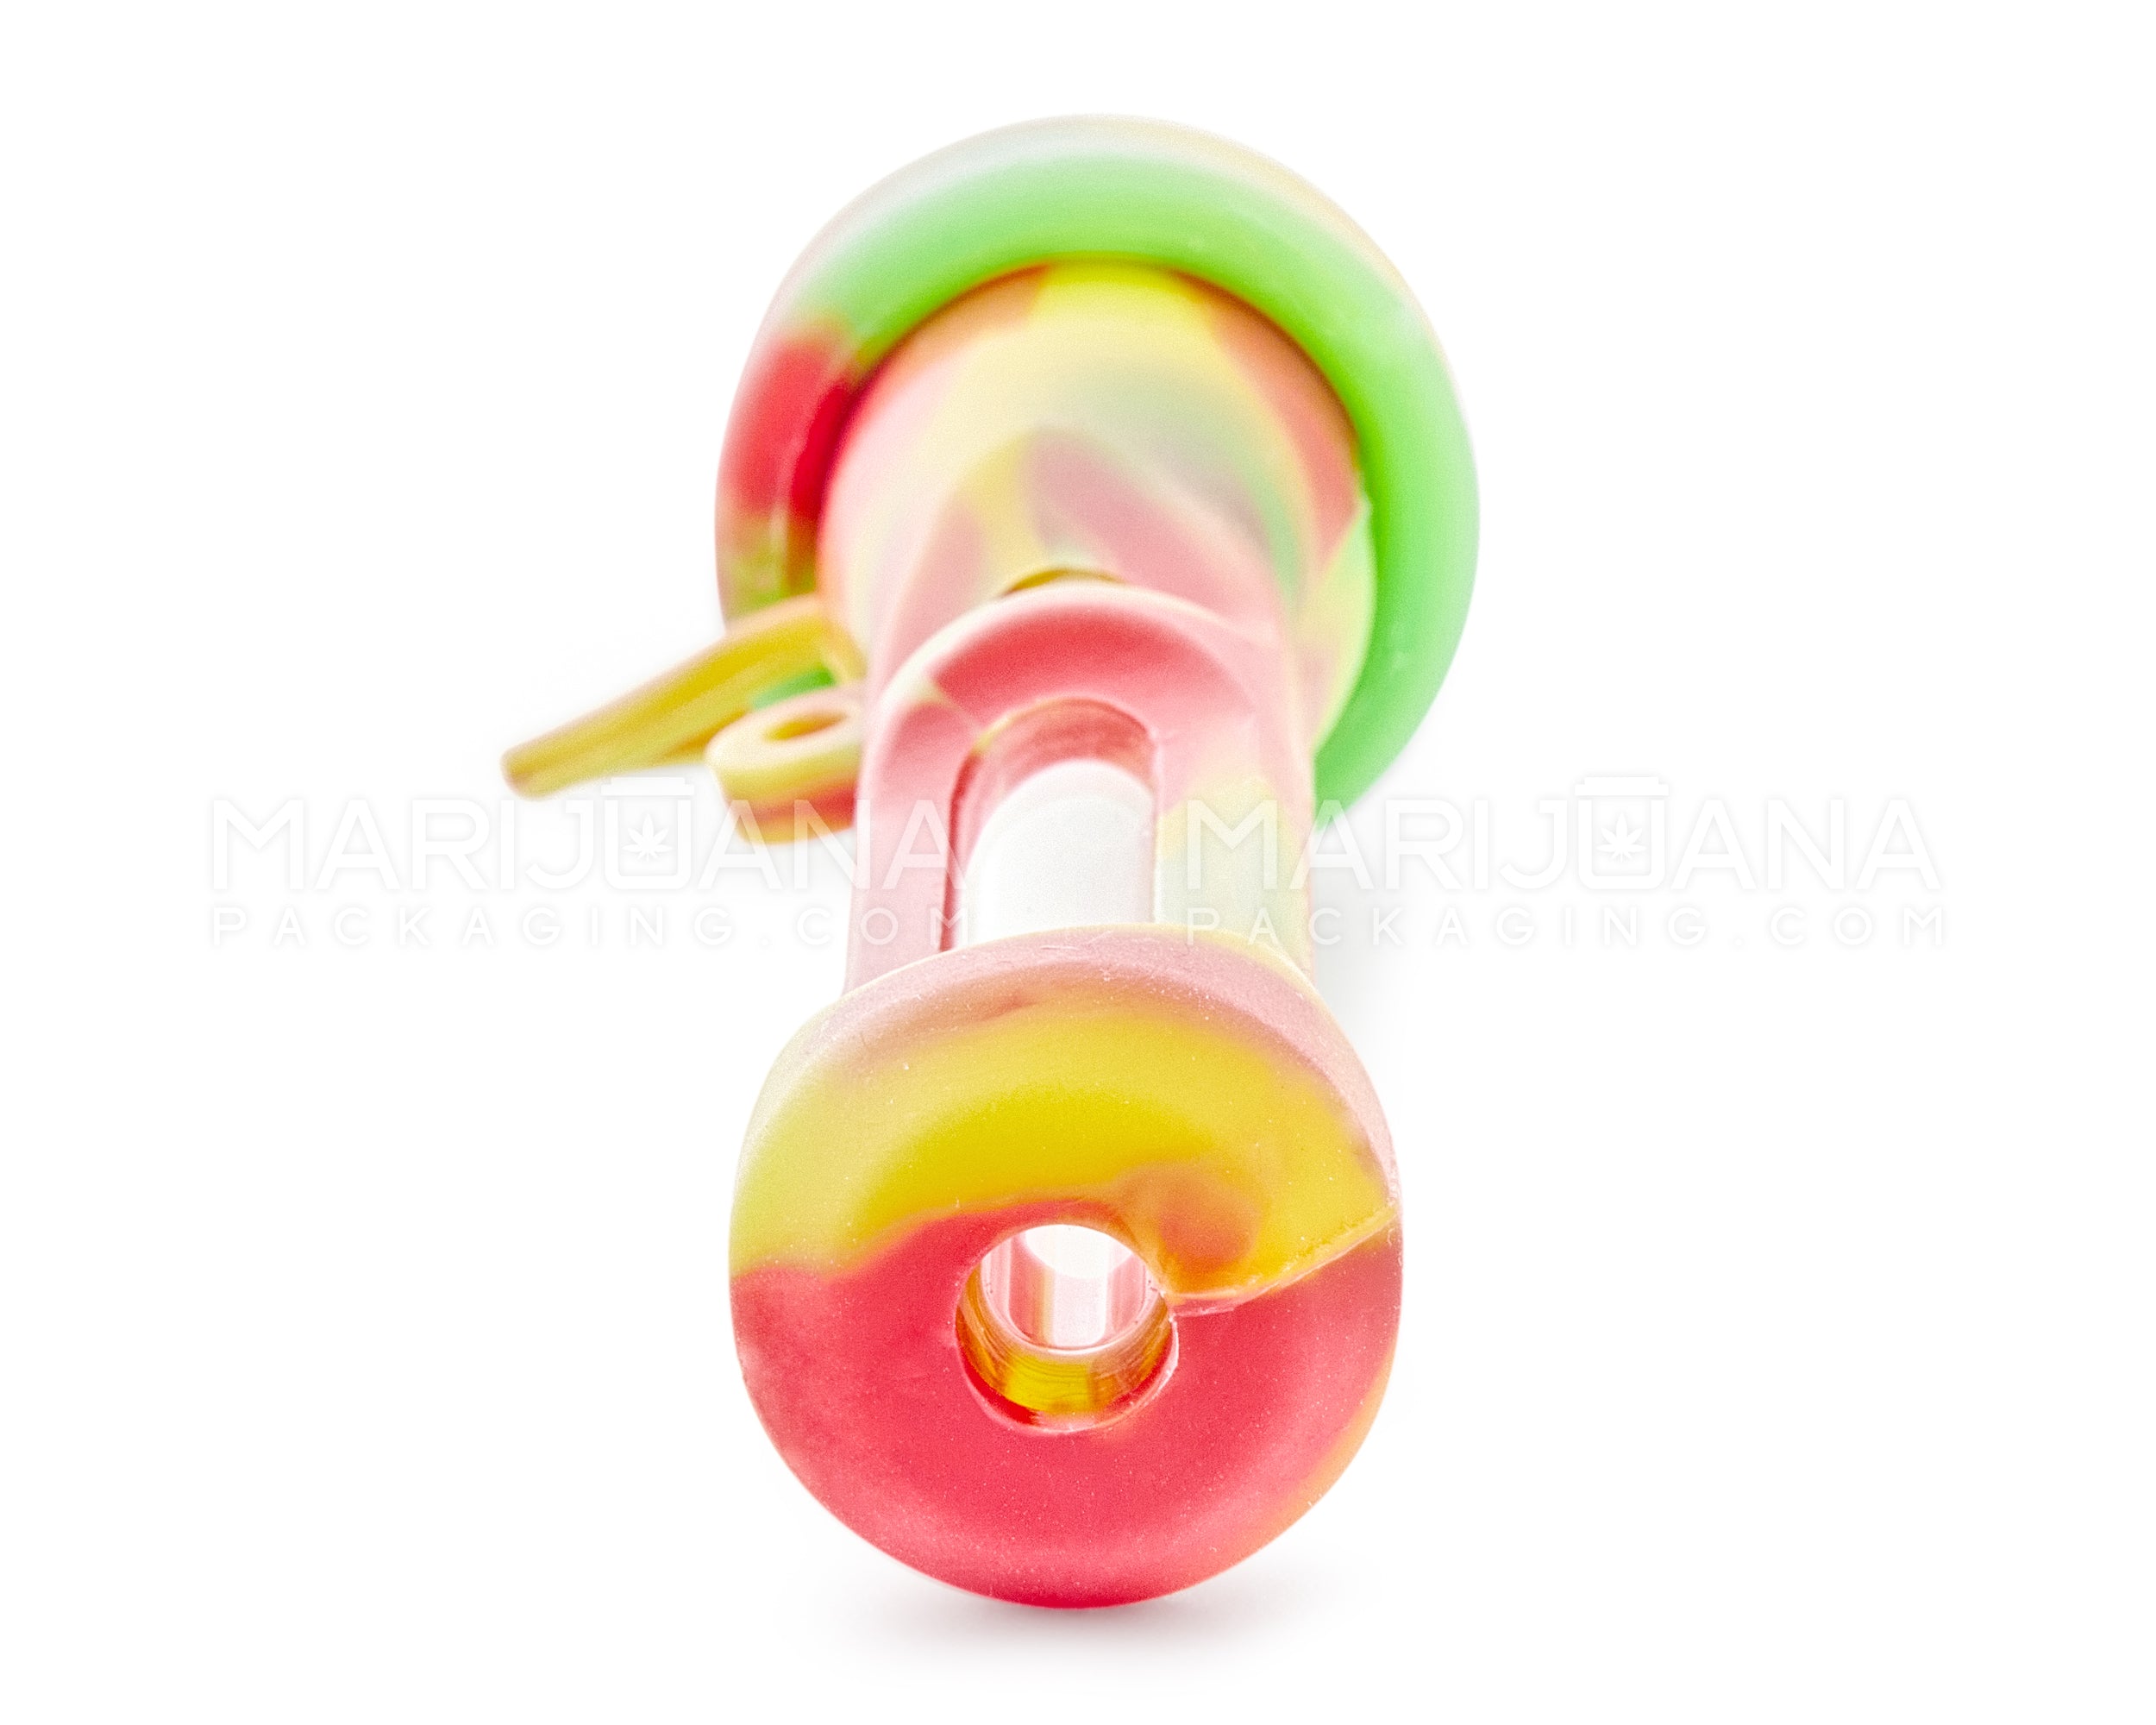 Silicone Cover Glass Chillum Hand Pipe w/ Closing Cap | 3.5in Long - Silicone/Glass - Assorted